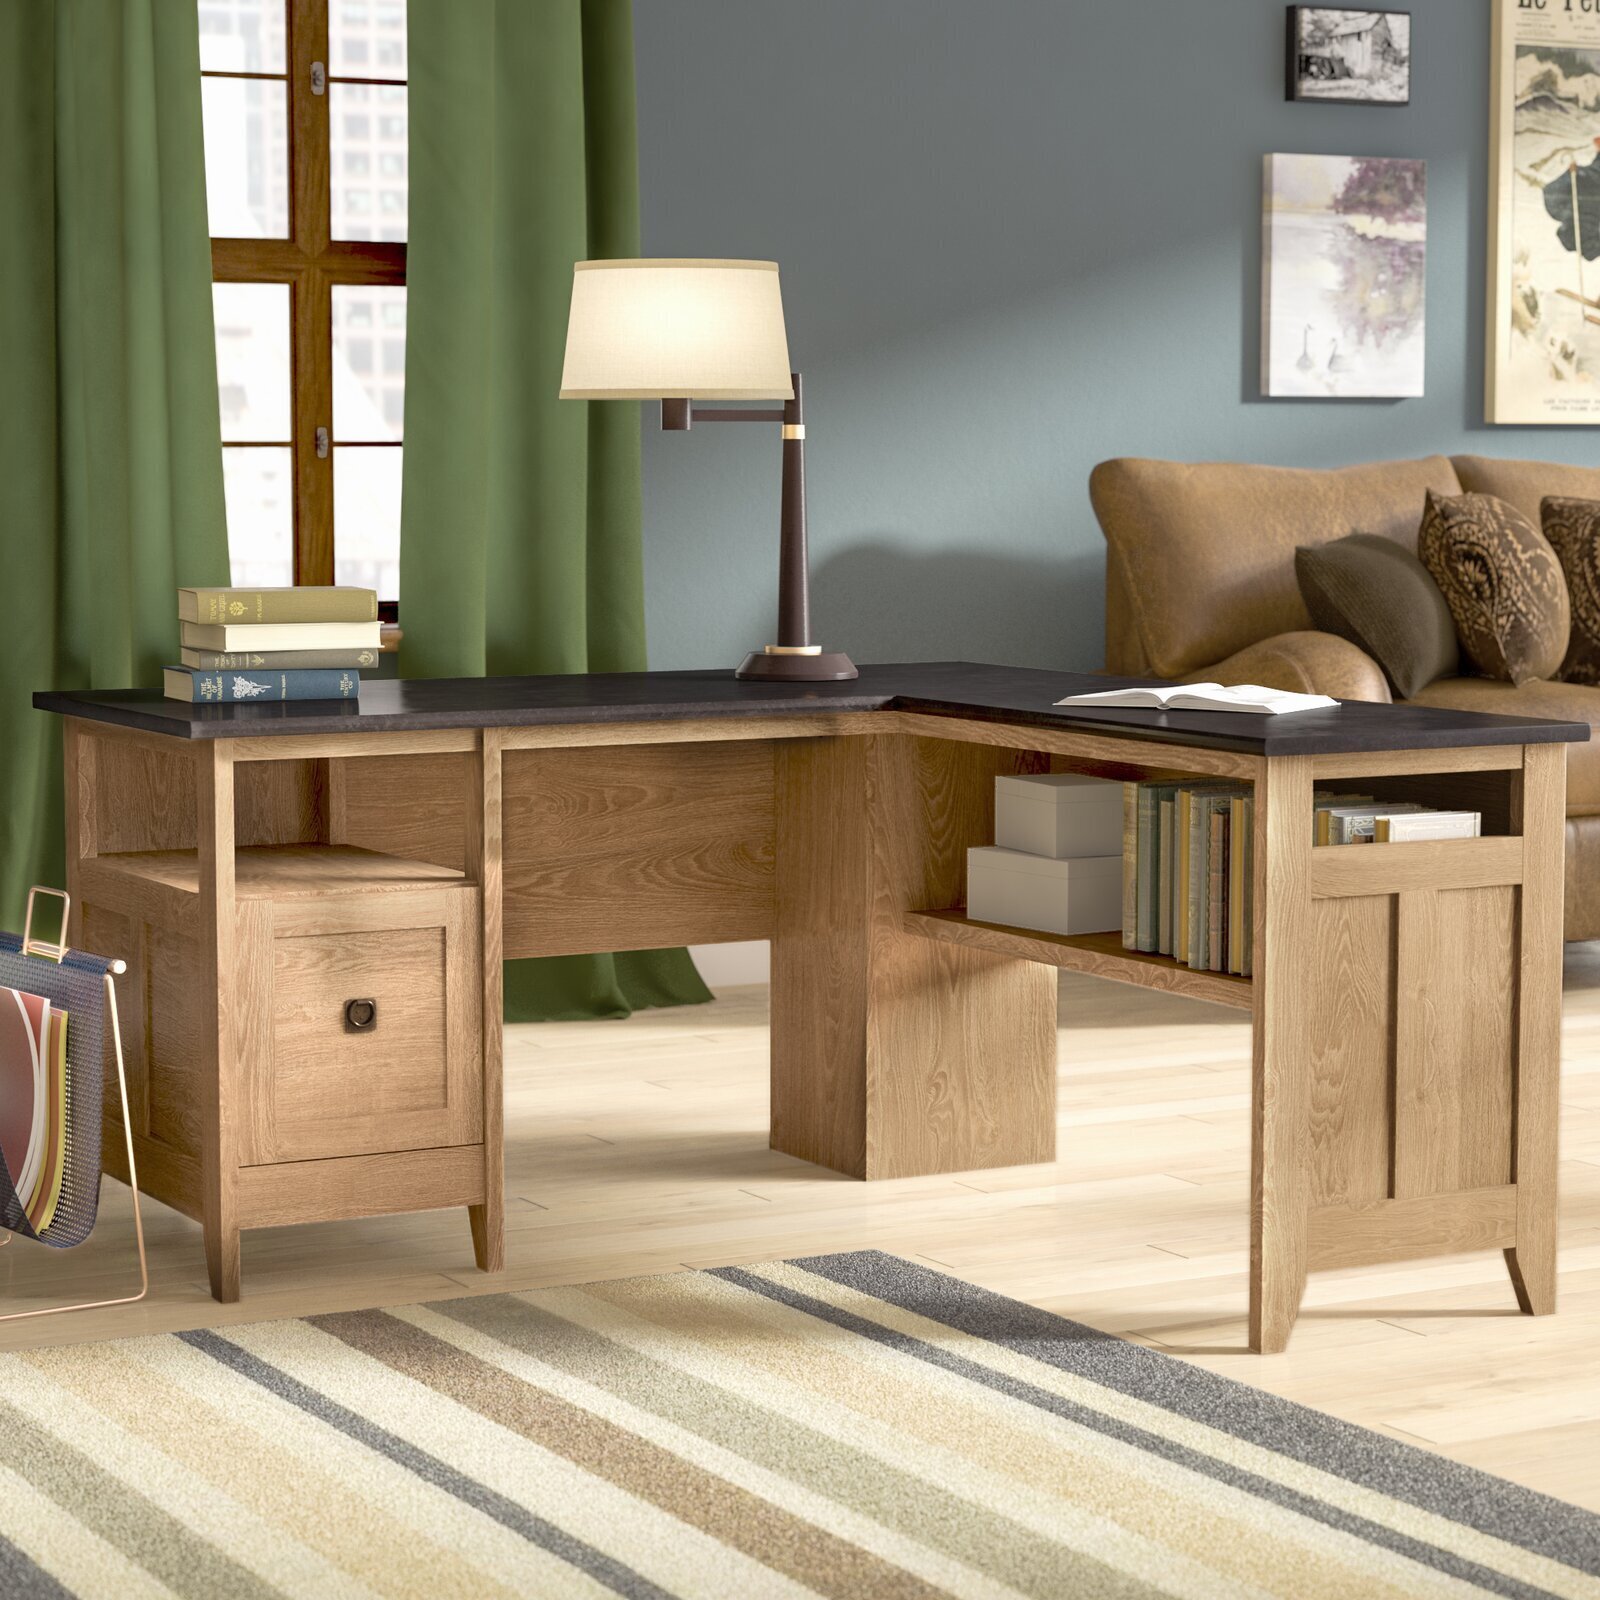 American Made Executive Desk For Home Office